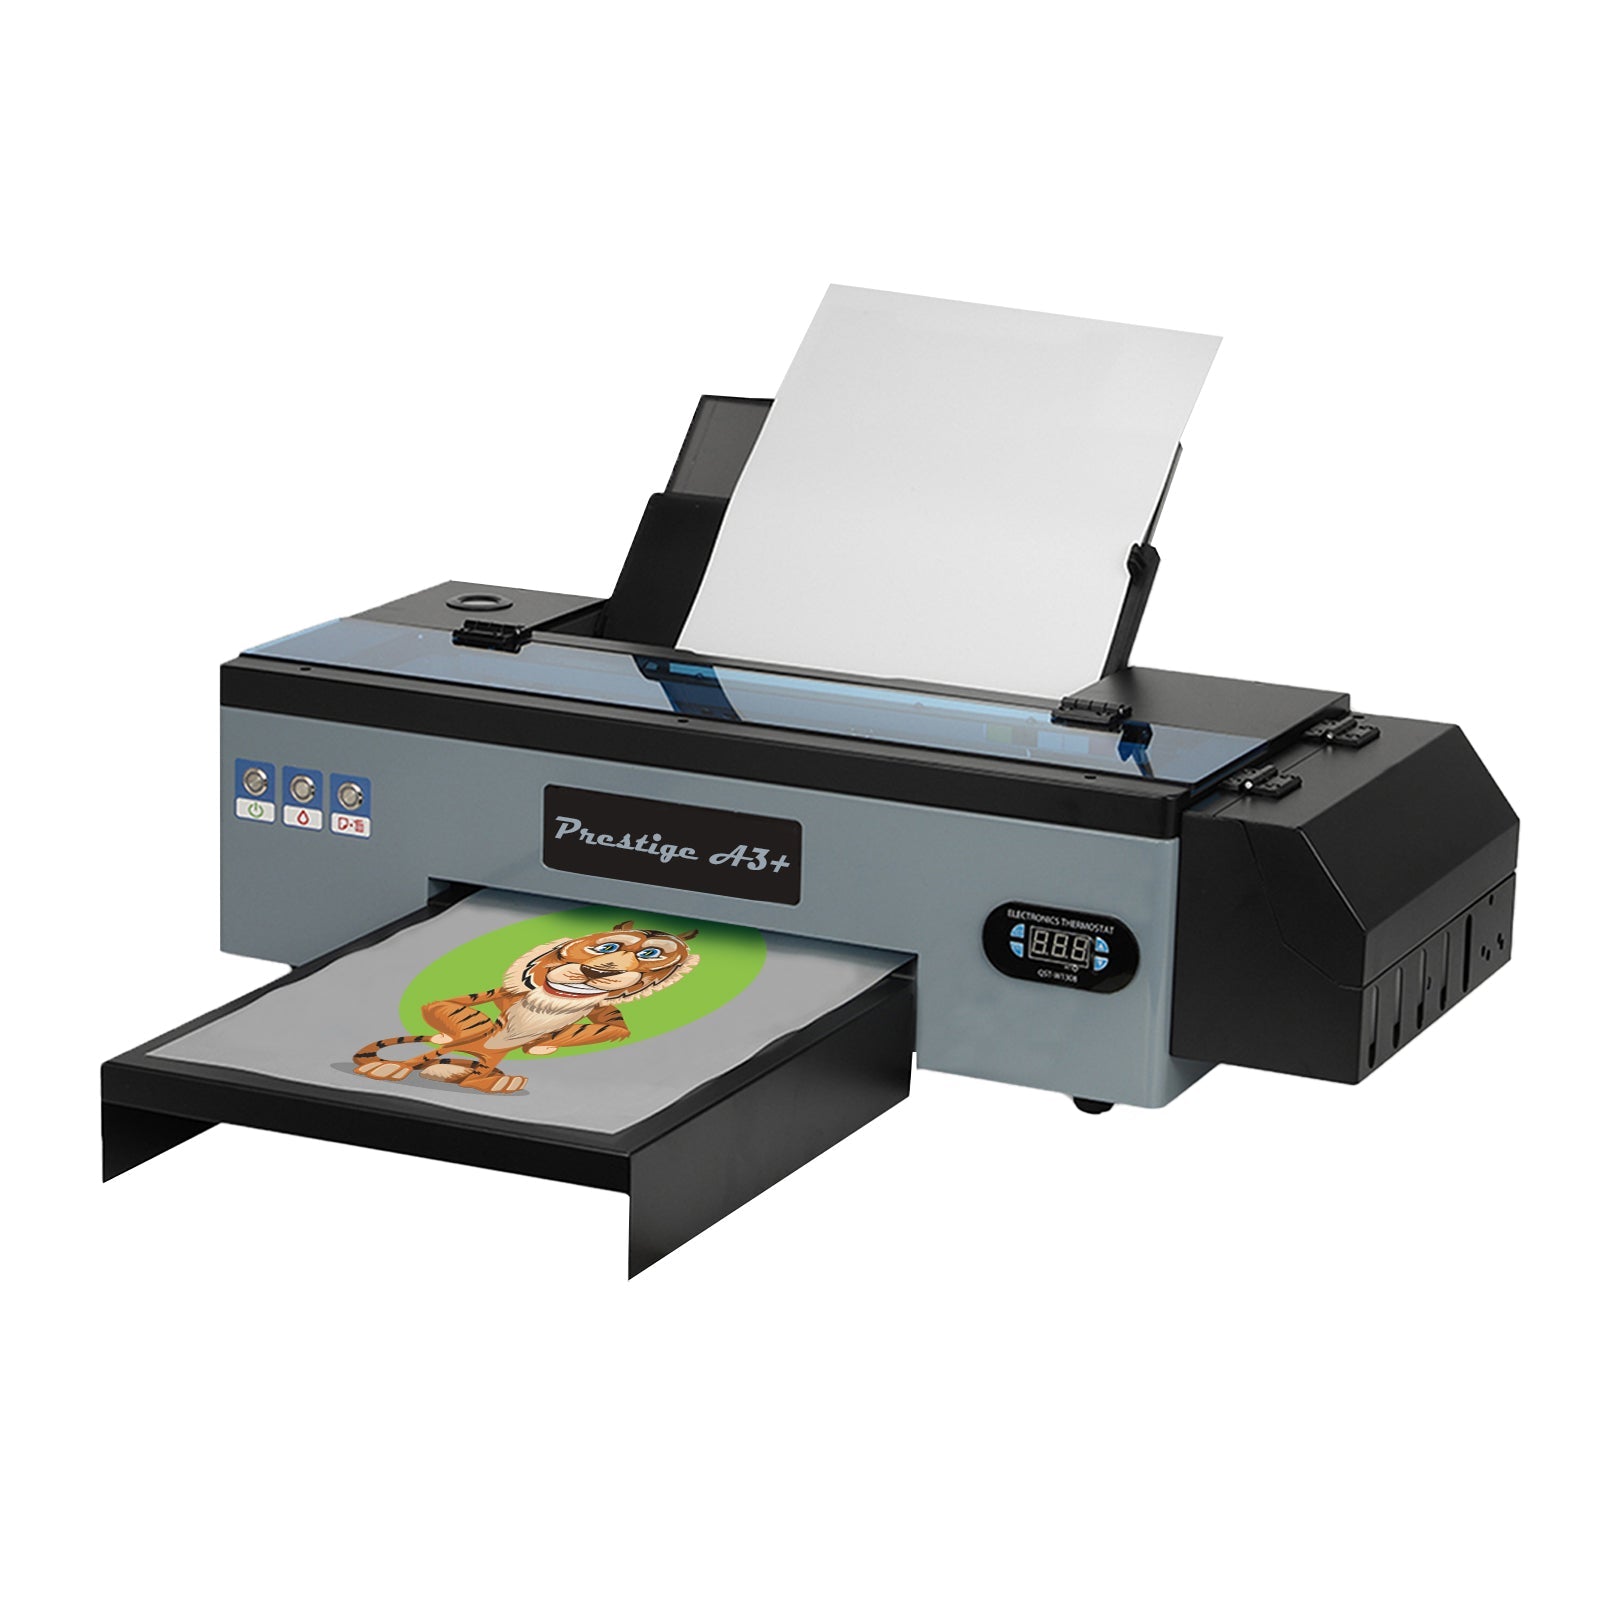 Epson SureColor F3070 DTG Production Edition Printer – Lawson Screen &  Digital Products